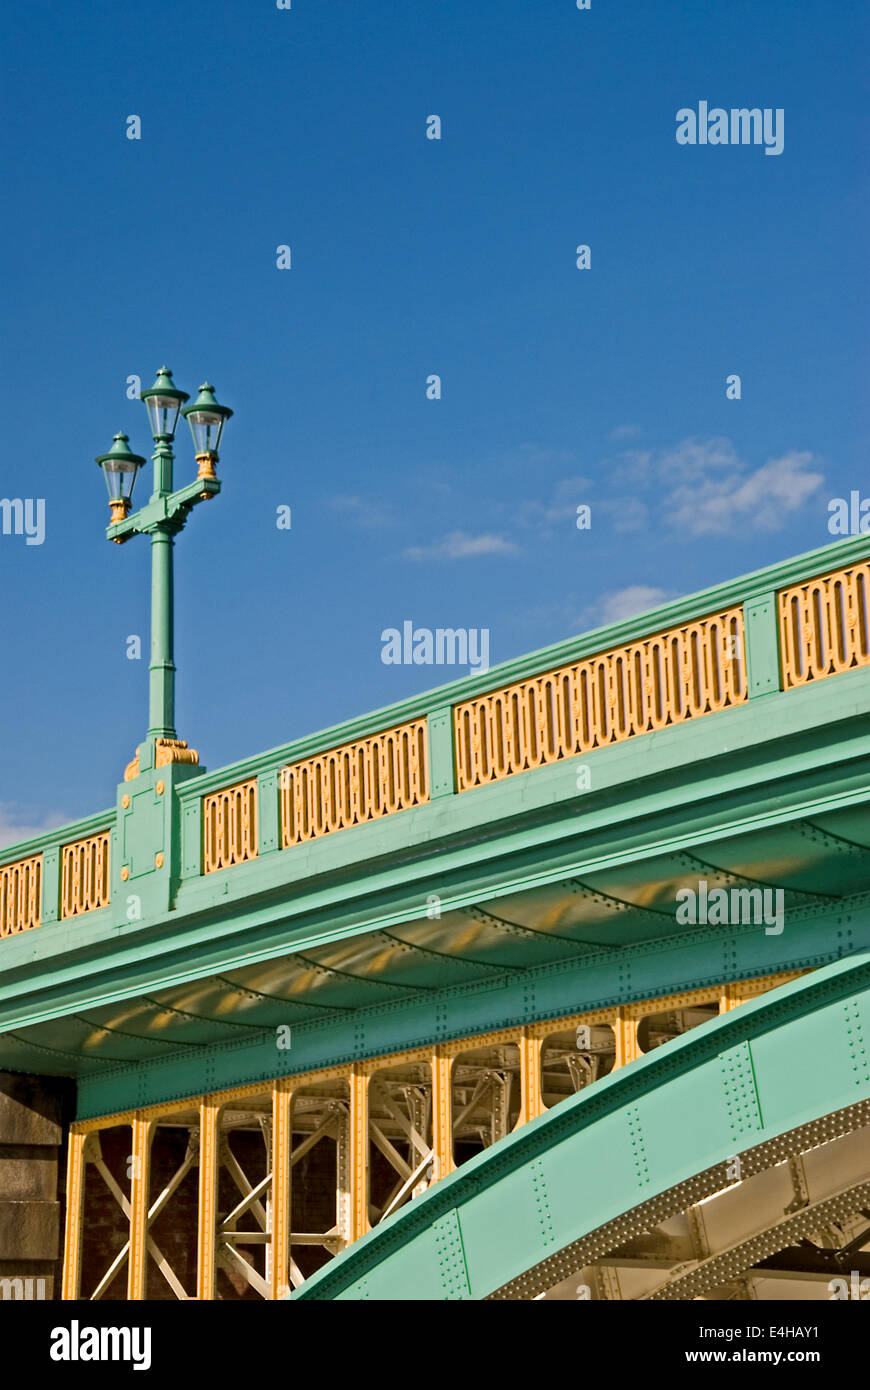 The ornate ironwork and street lighting column of Southwark Bridge in central London against a blue sky. Stock Photo